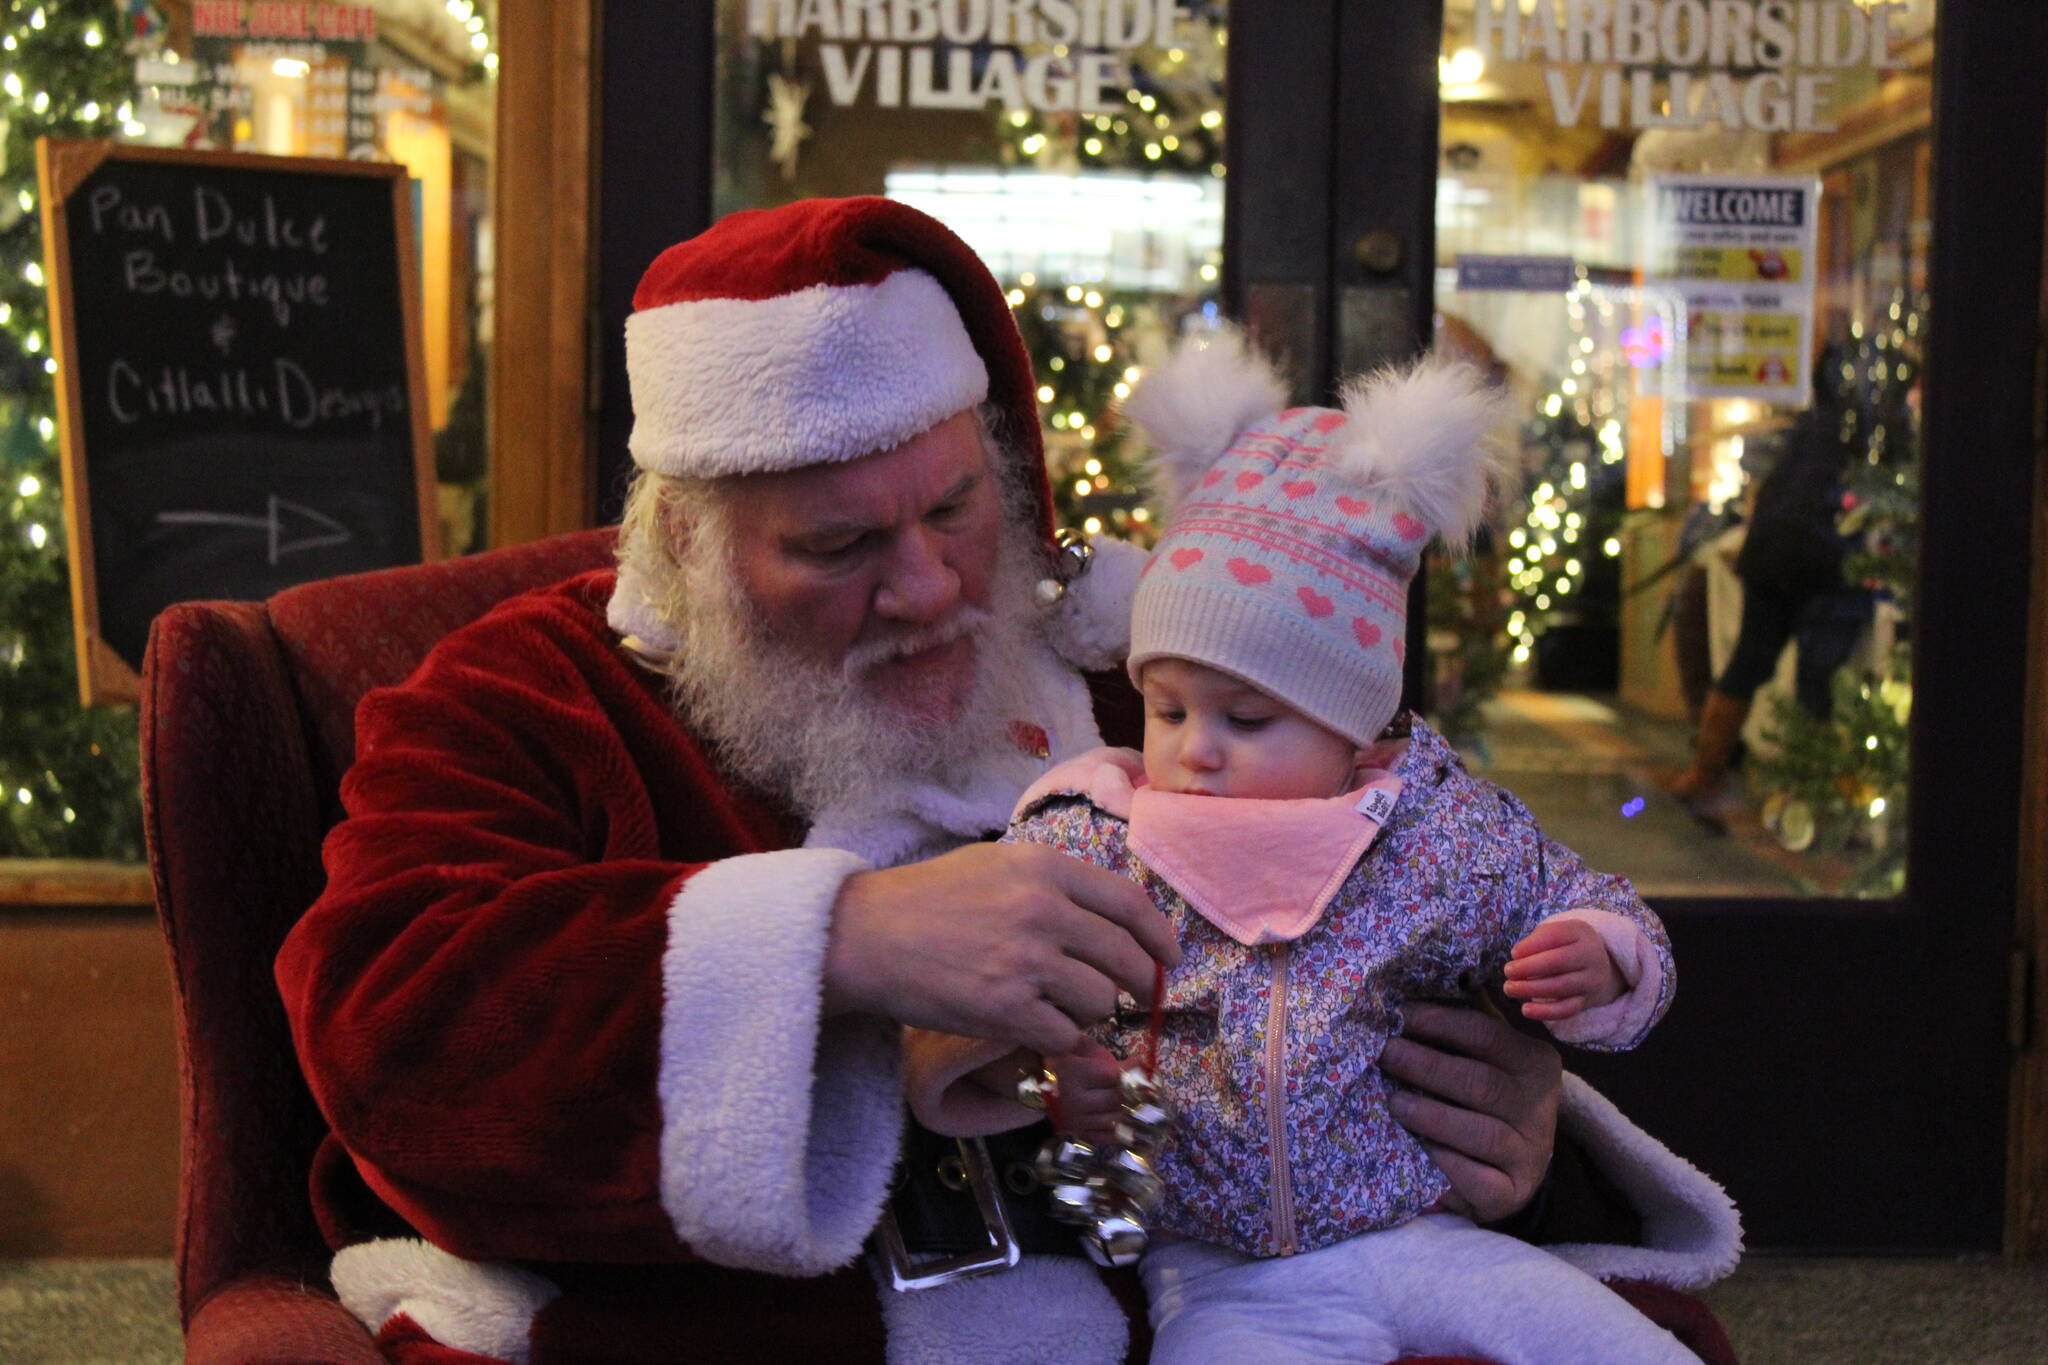 Photo by Karina Andrew/Whidbey News-Times
Noelle Hallquist, 16 months, sits on Santa’s lap Dec. 4 on Pioneer Way.